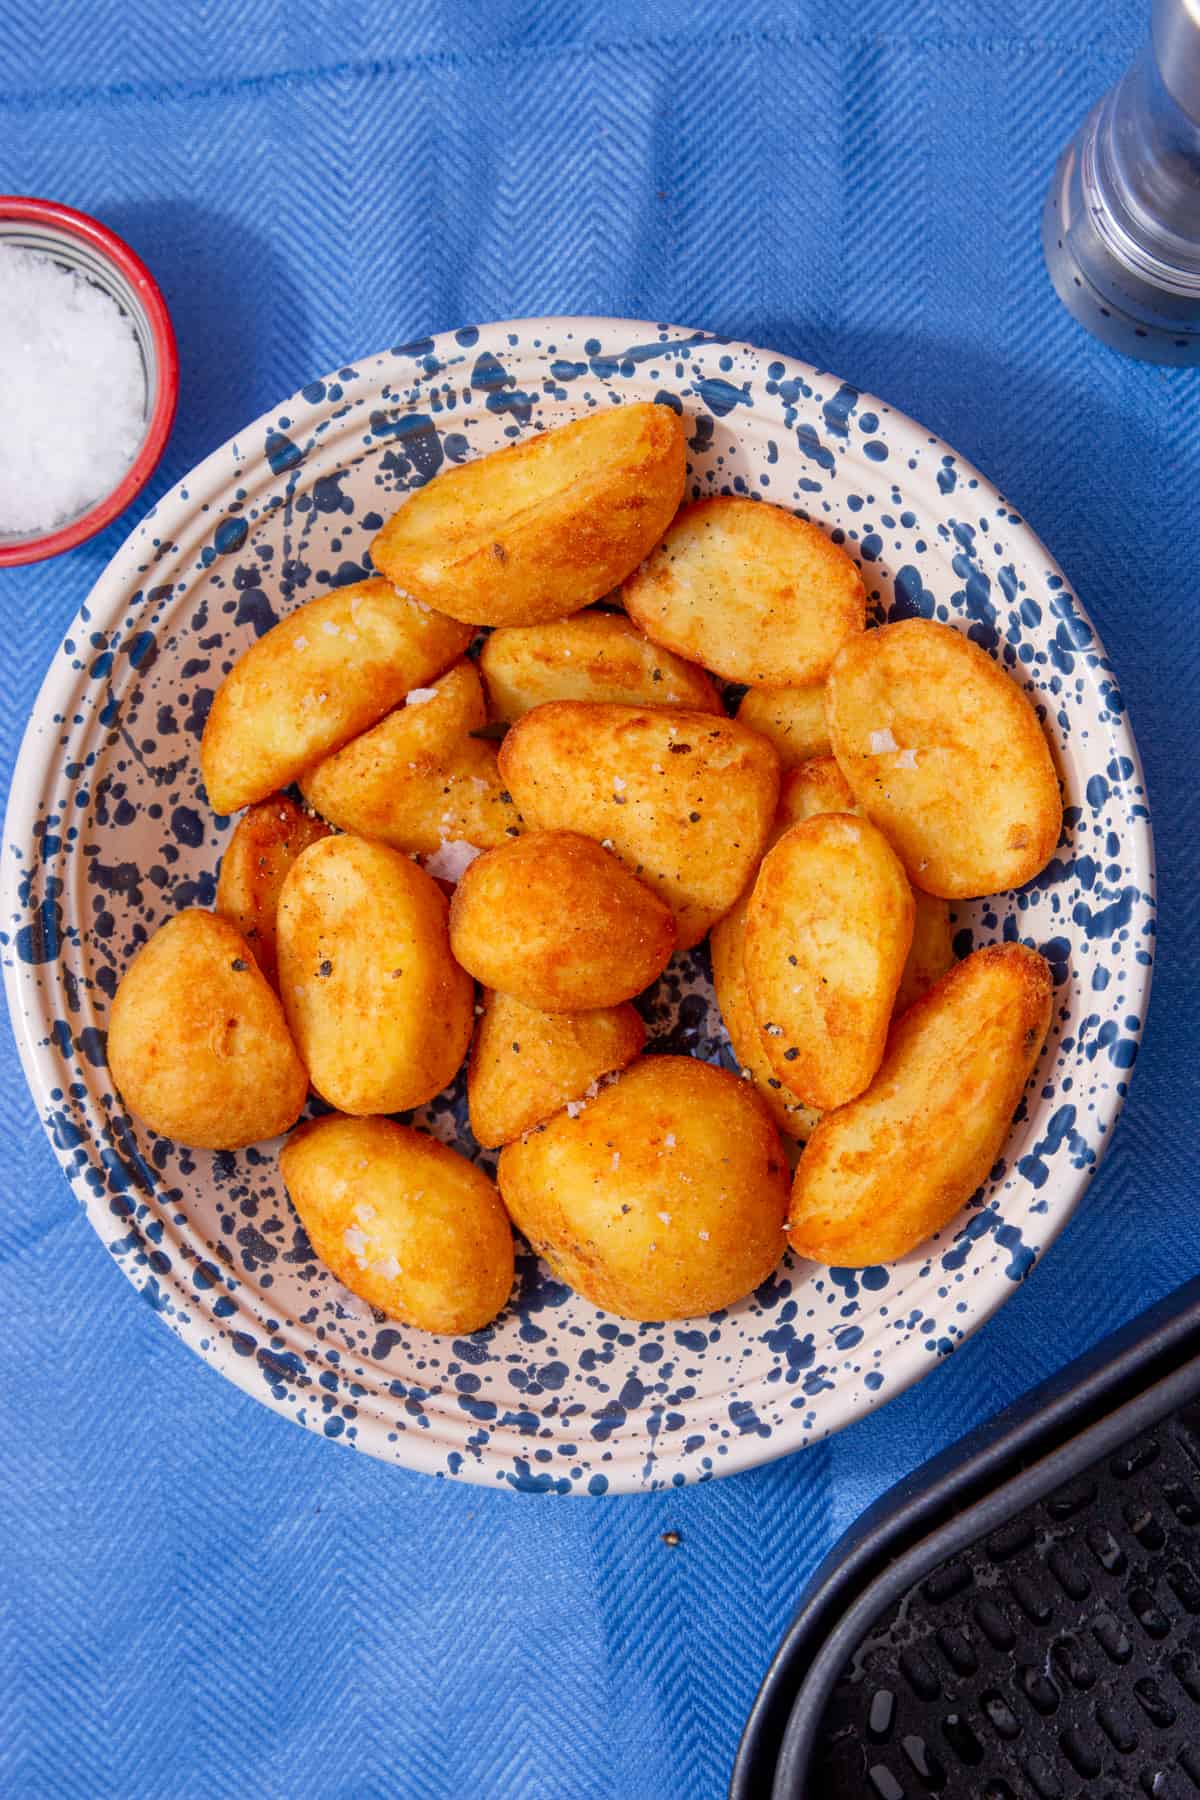 Seasoned golden browned roast potatoes in a patterned white and bowl with a small bowl of salt behind on a blue cloth.